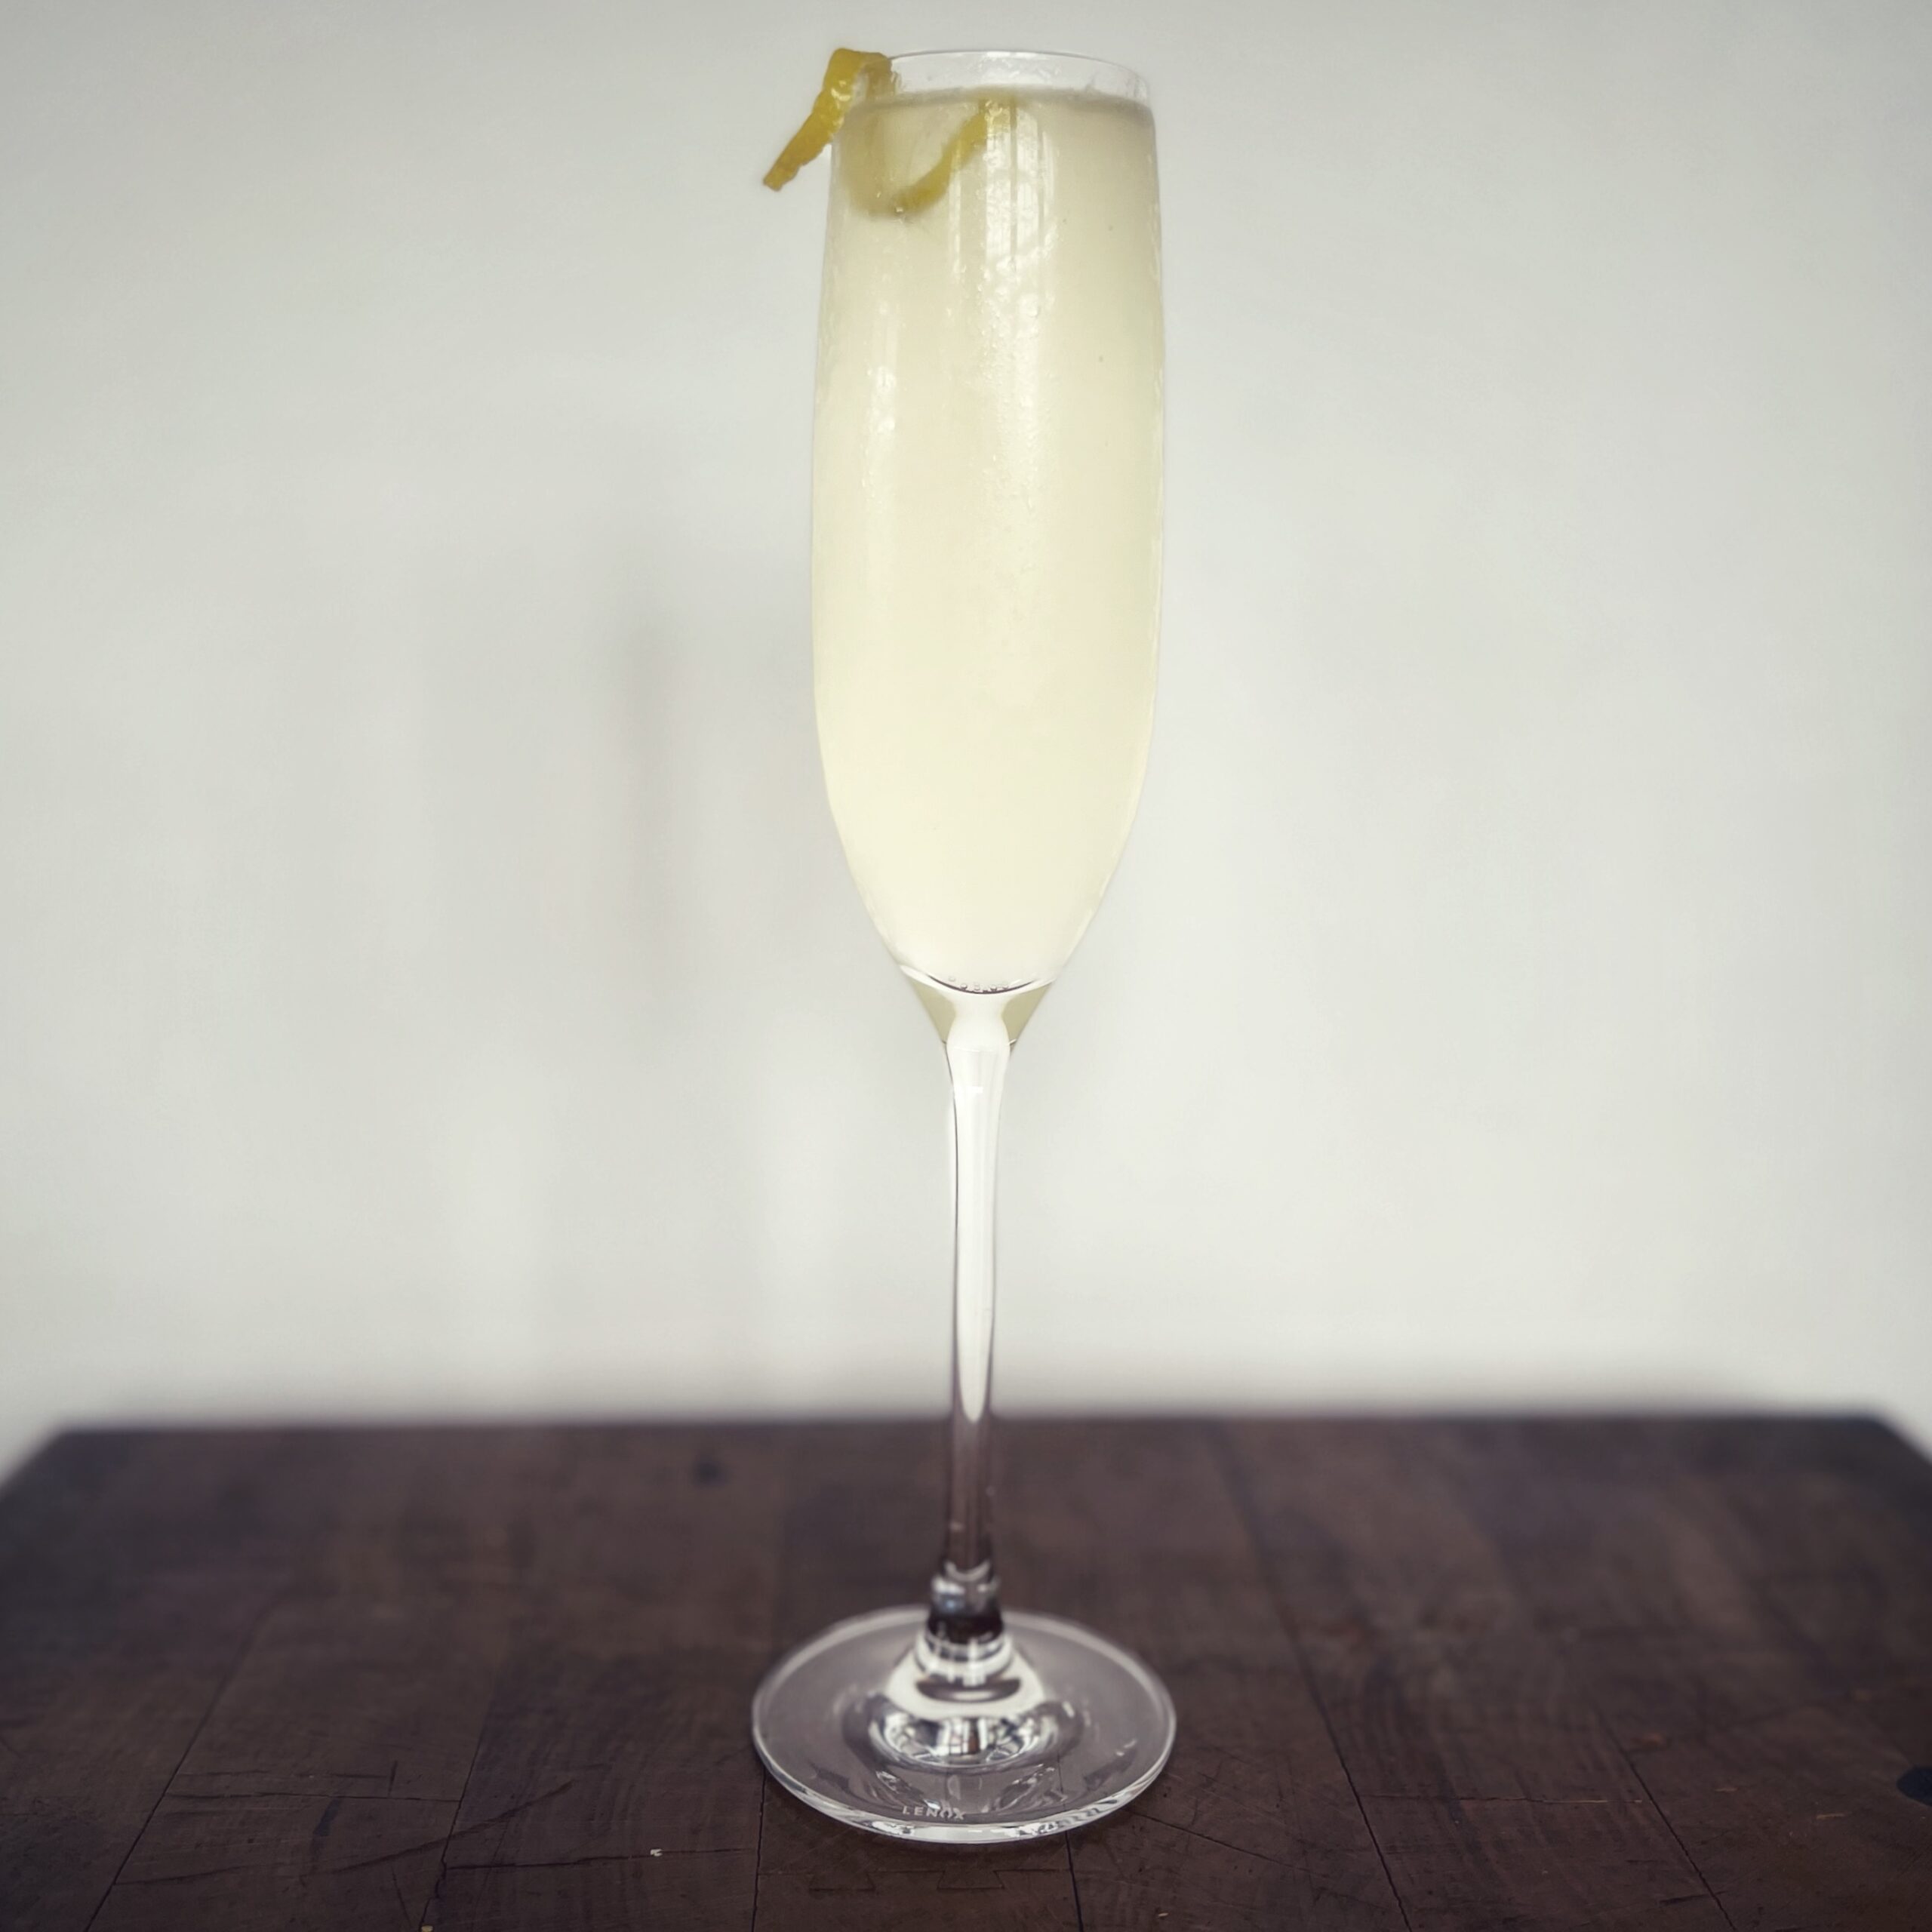 French 75 with Genever